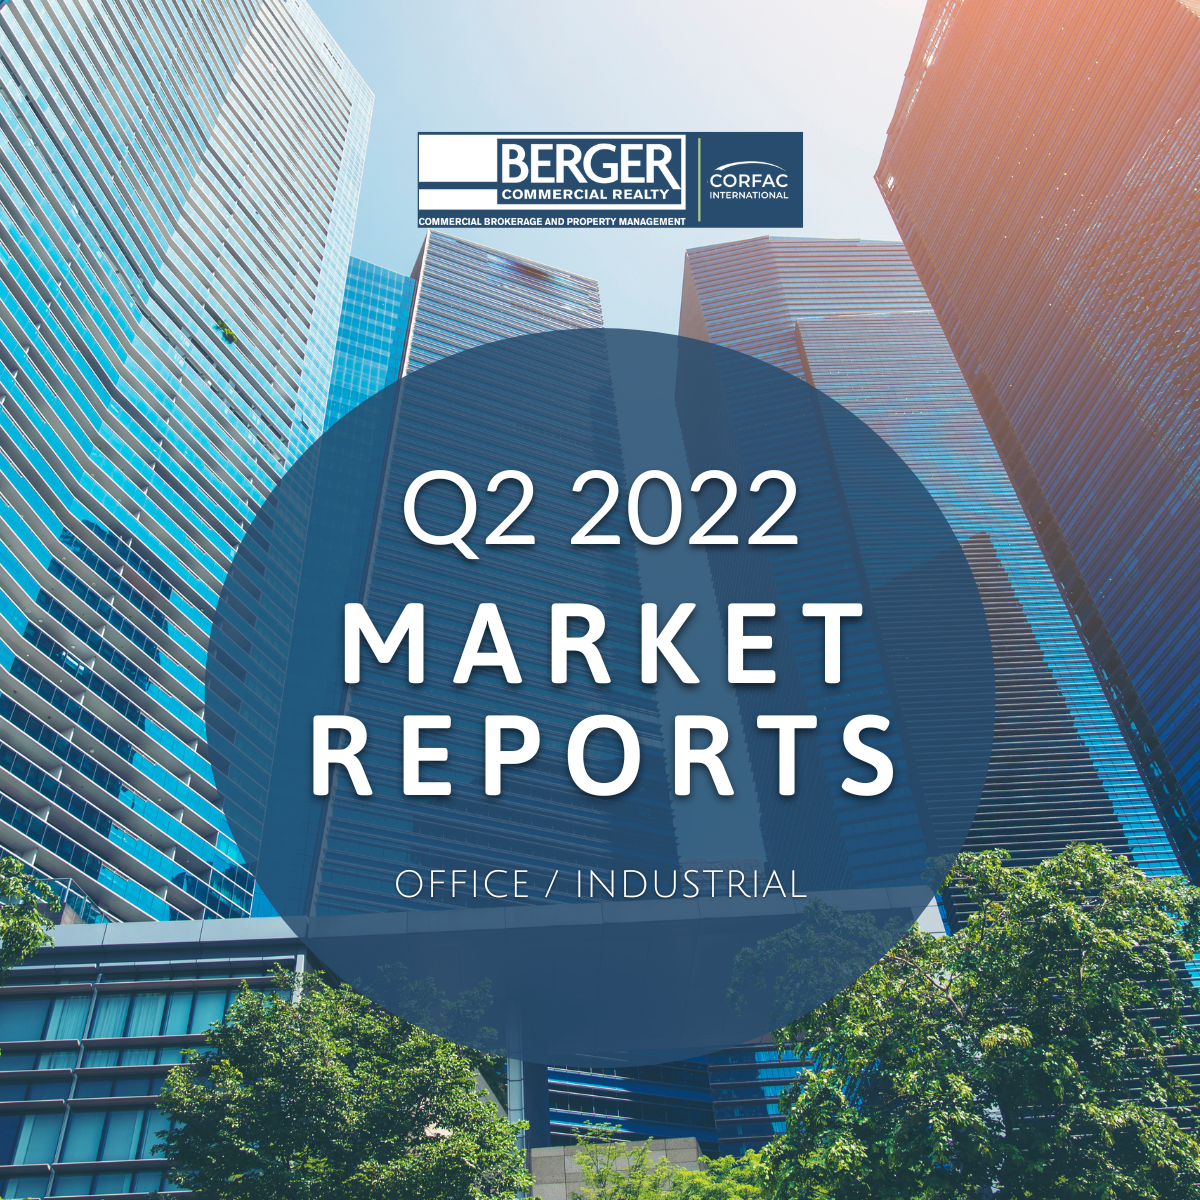 We Are Pleased To Provide You With This Copy Of Berger Commercial Realty’s Q2 2022 Market Reports